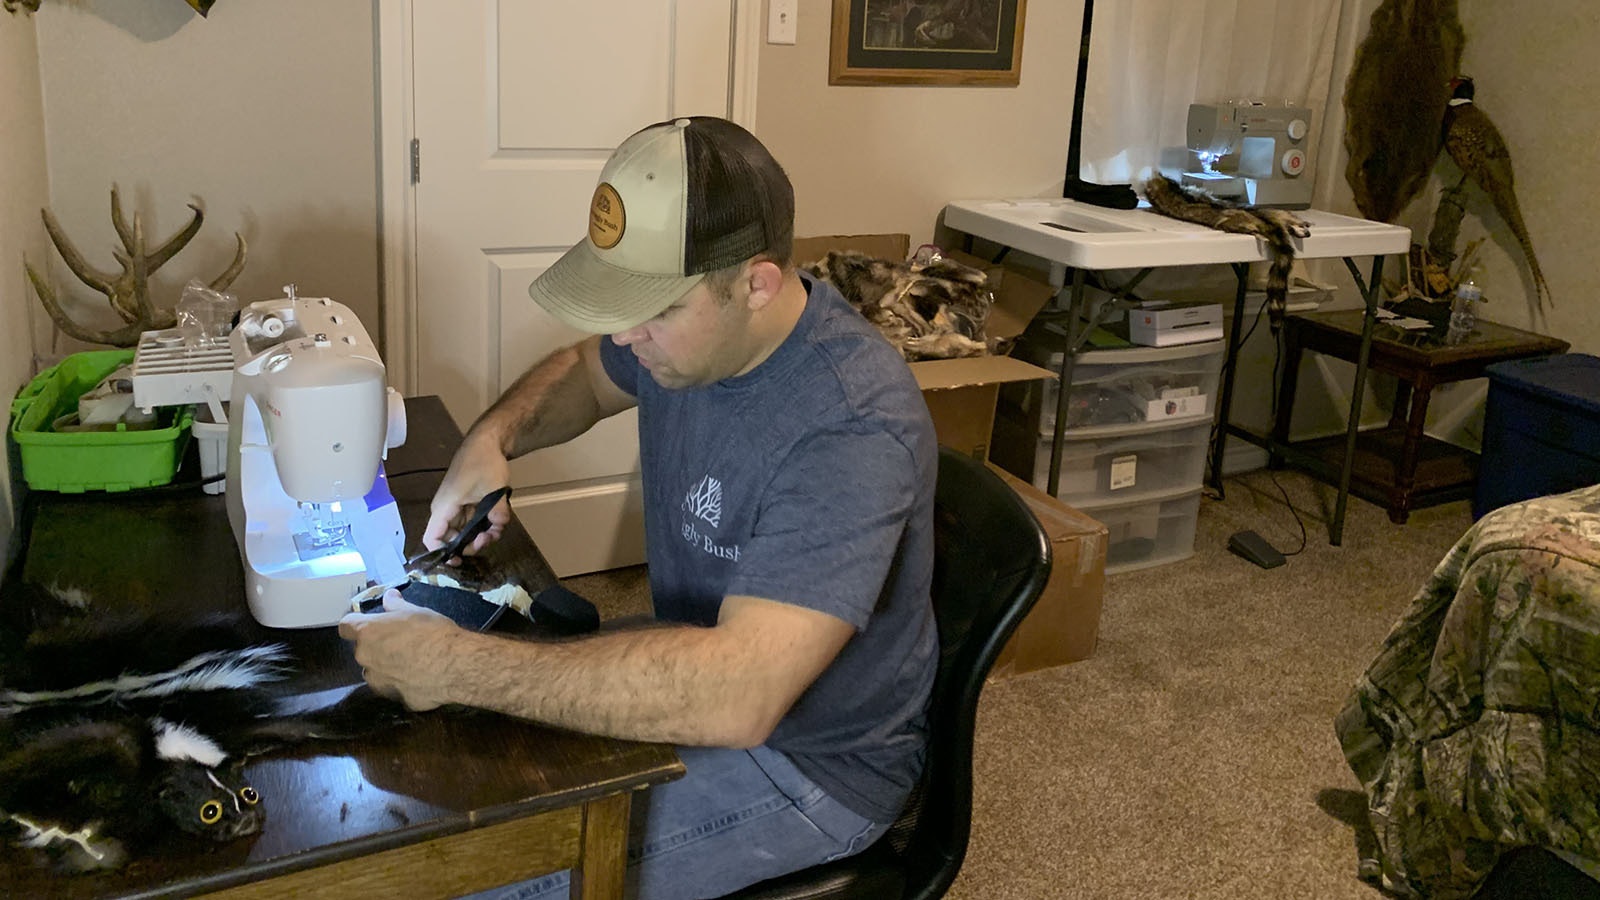 Craig Summitt and his wife Karely work from their home in San Angelo, Texas, creating useful novelty items from animal pelts. Thanks to a boost from Wyoming customers, their business has boomed over the past year.